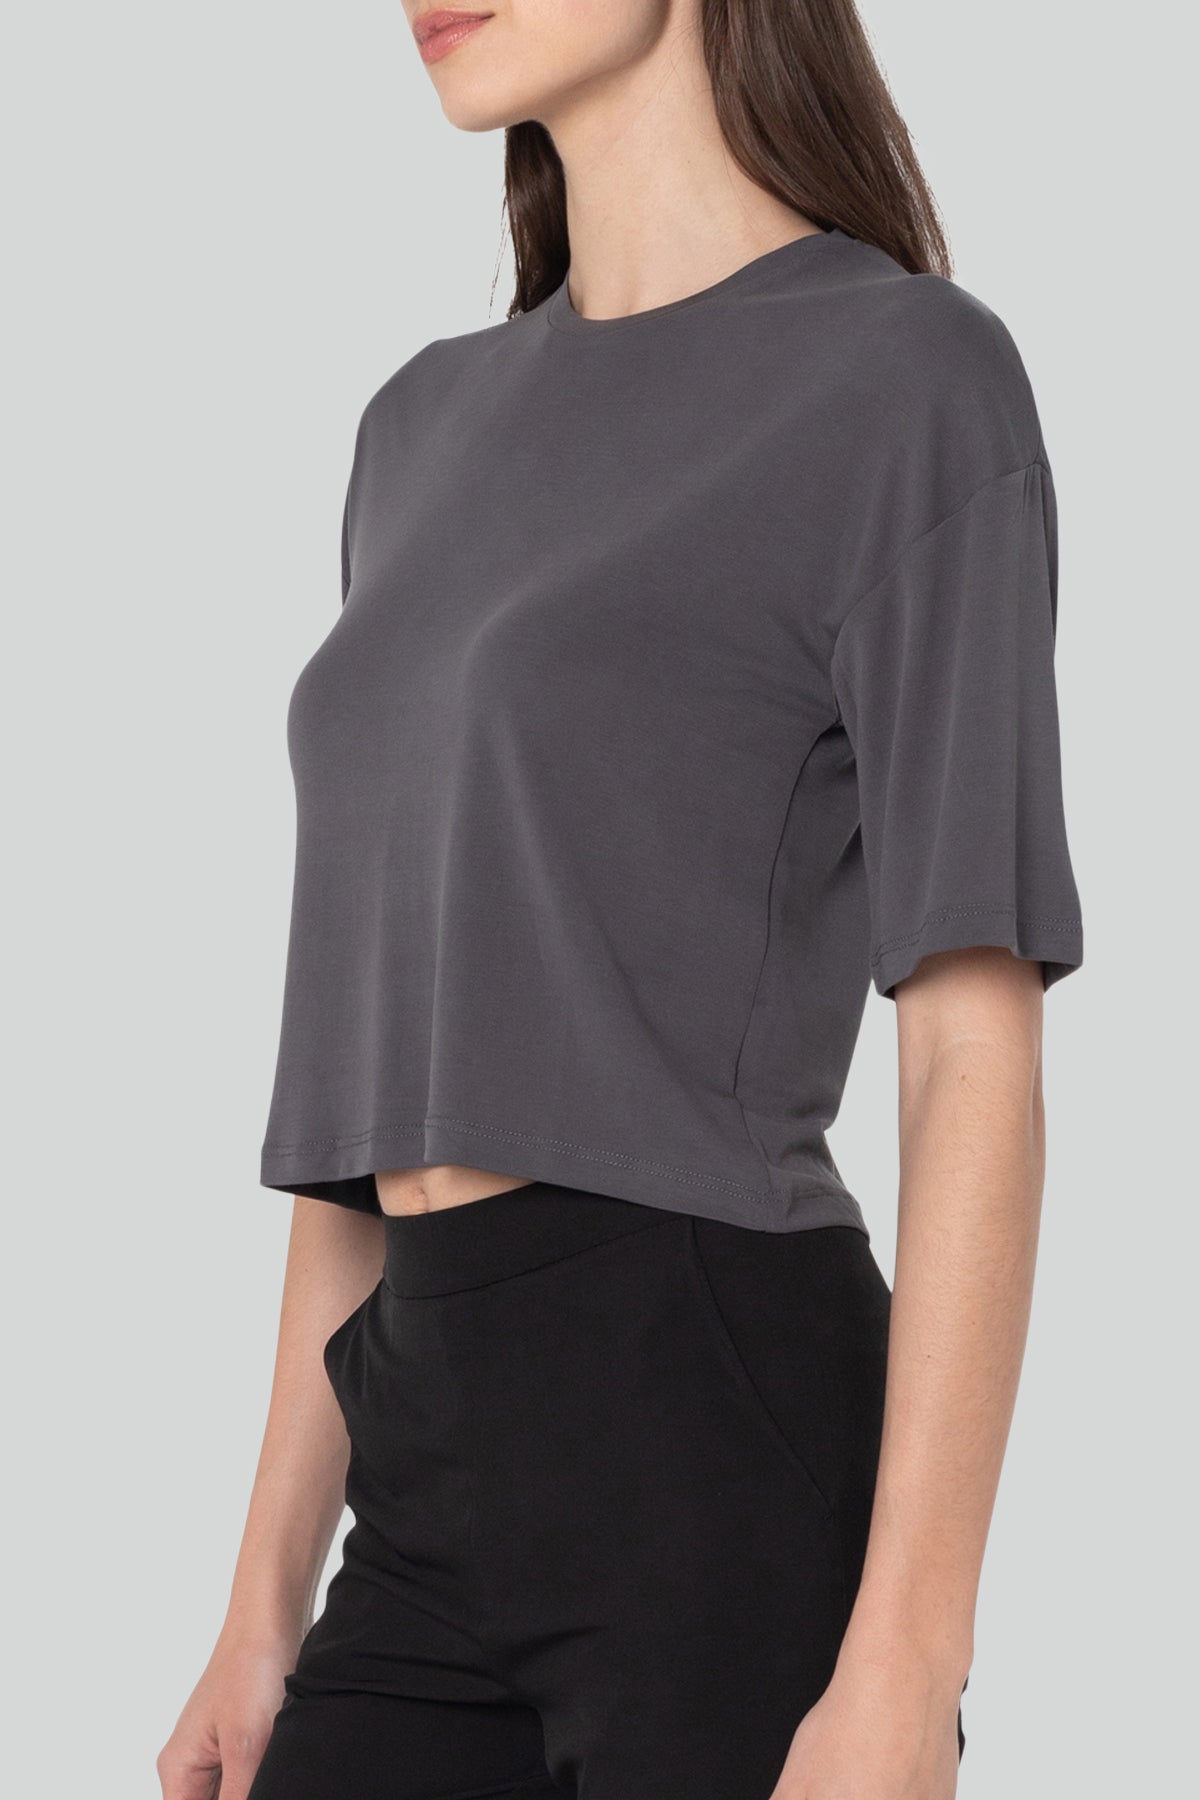 Pure & Simple Cropped T-Shirt Black Grey Gray White